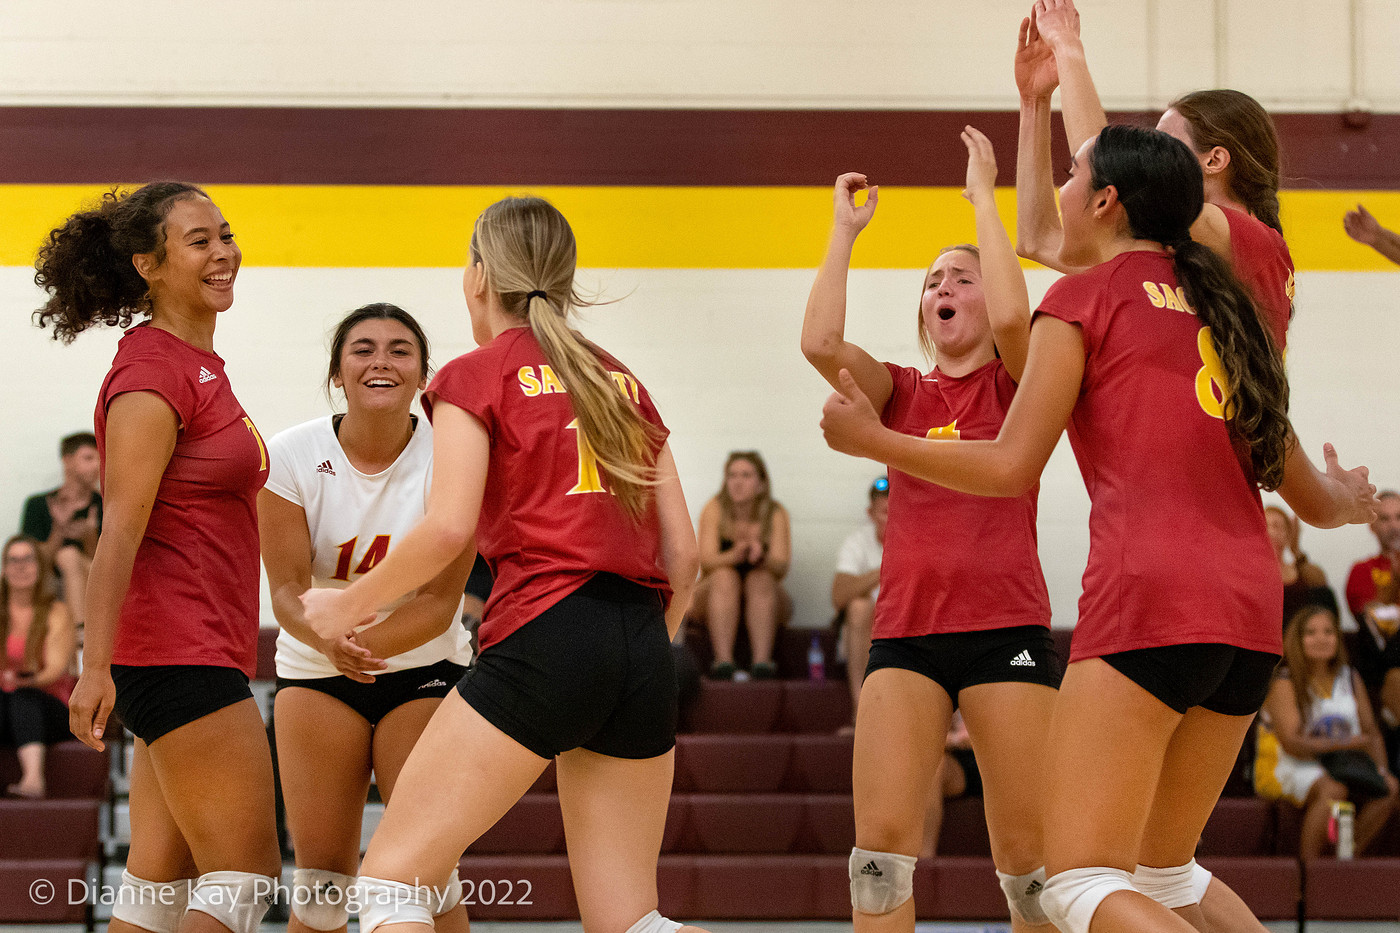 Sac City wins their 3rd straight game with a 3-1 win over DVC (25-17, 25-18, 21-25, 25-17)